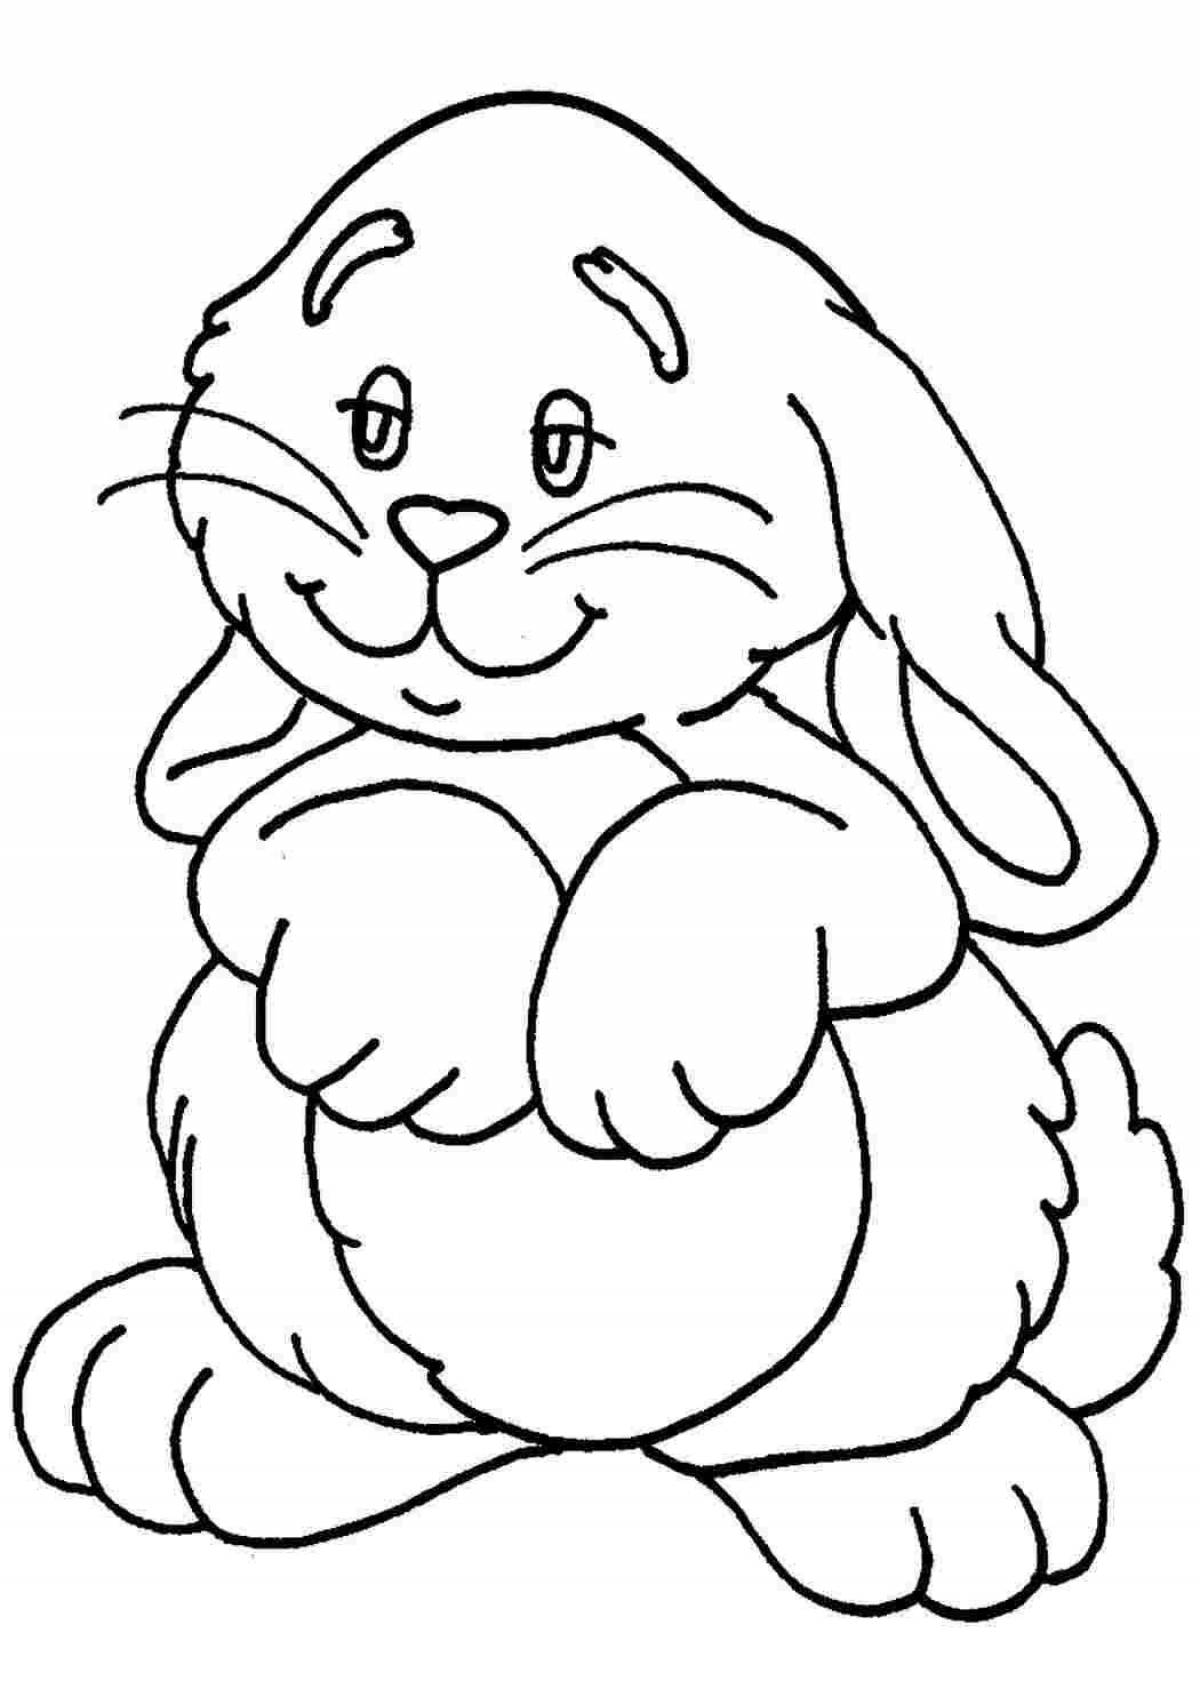 Color-frenzy hare coloring for kids